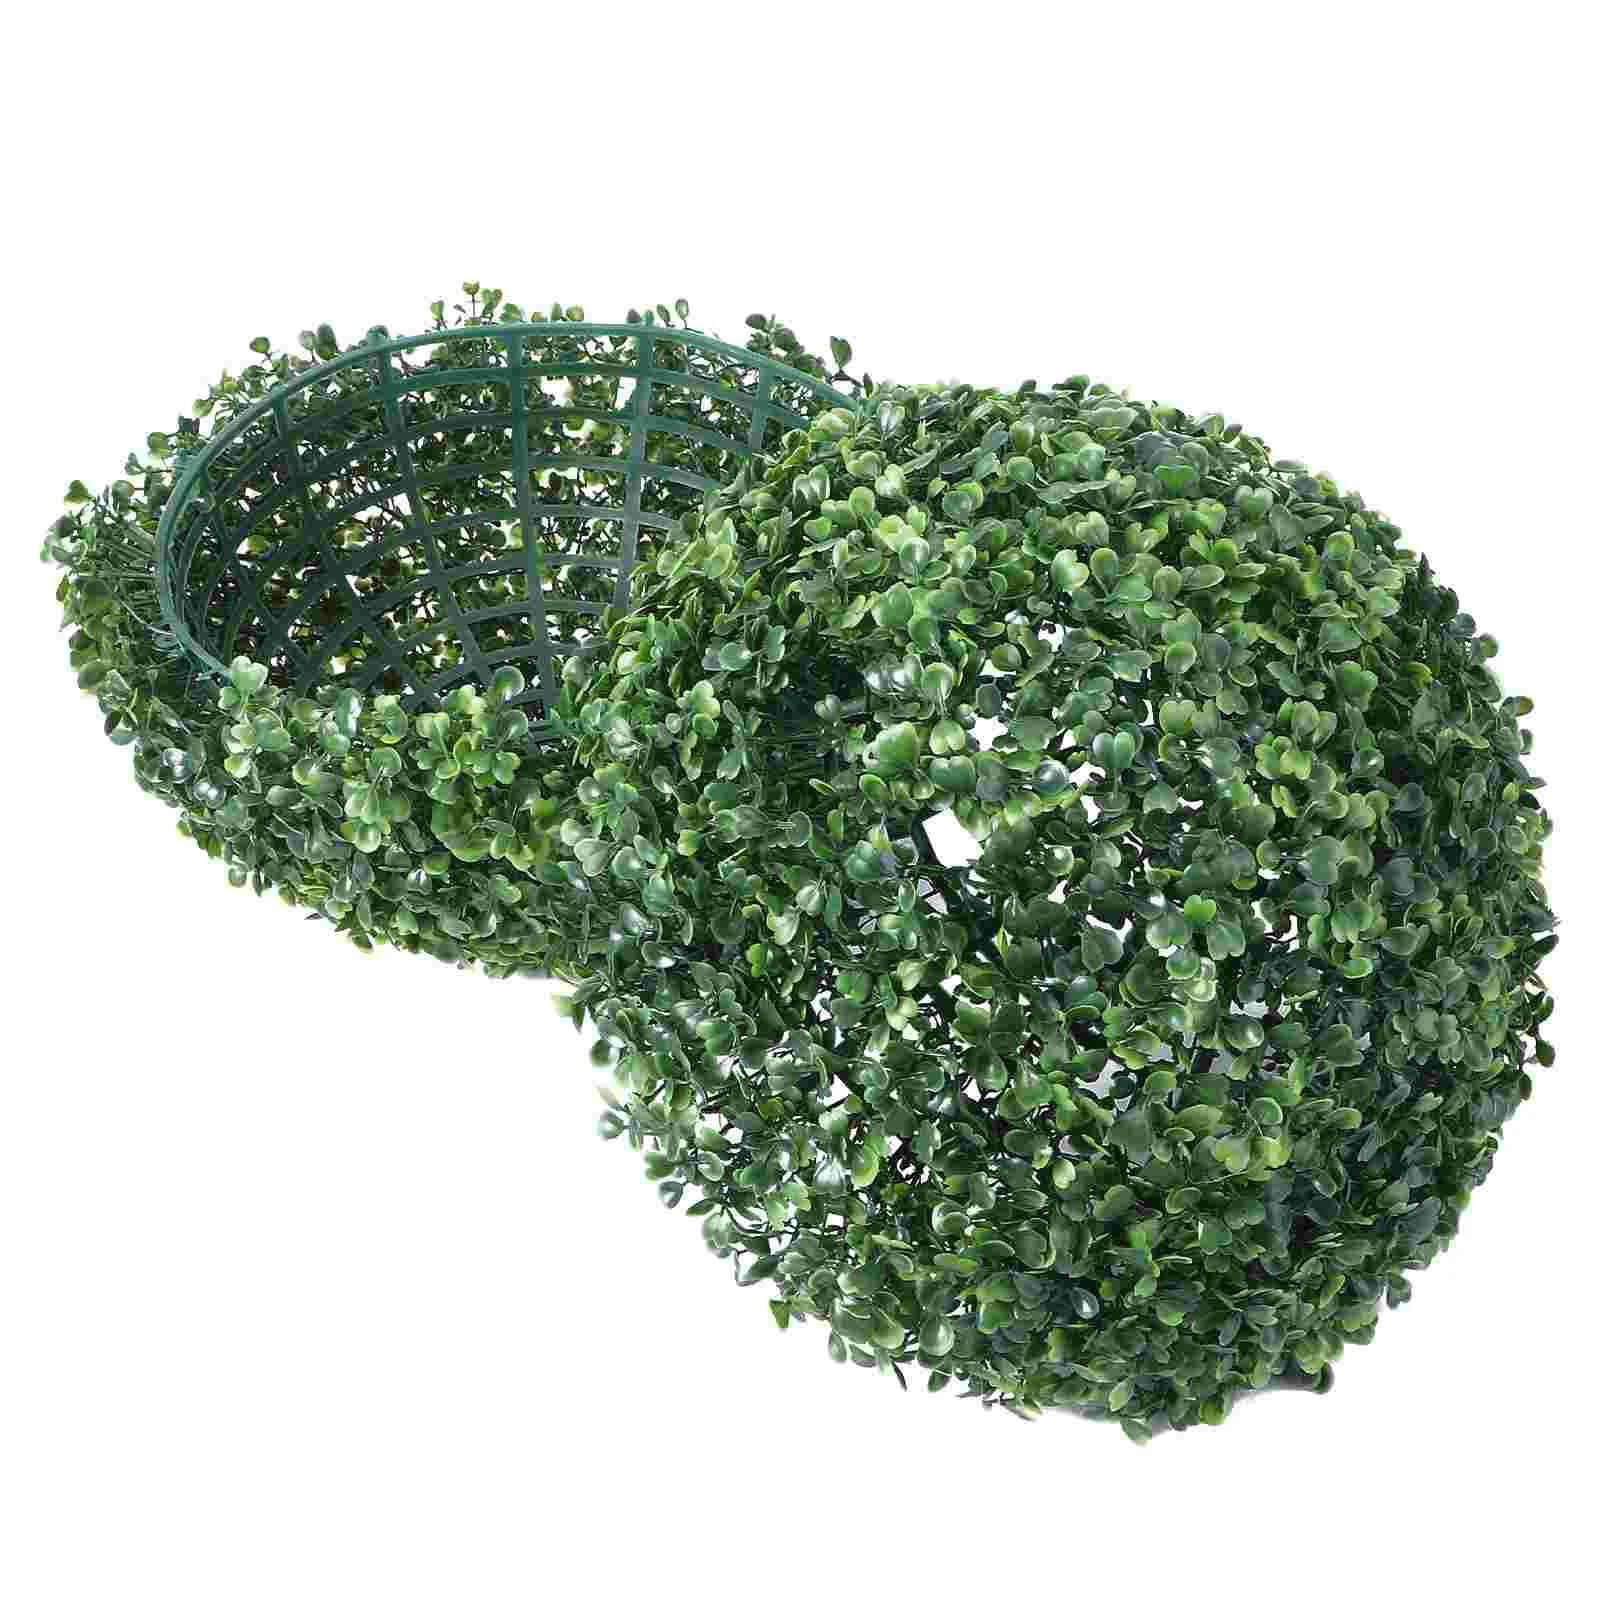 

Topiary Artificial Ballsgrass Boxwood Hanging Faux Decorative Outdoorfake Ornament Greenery Simulated Ceiling Decoration Moss